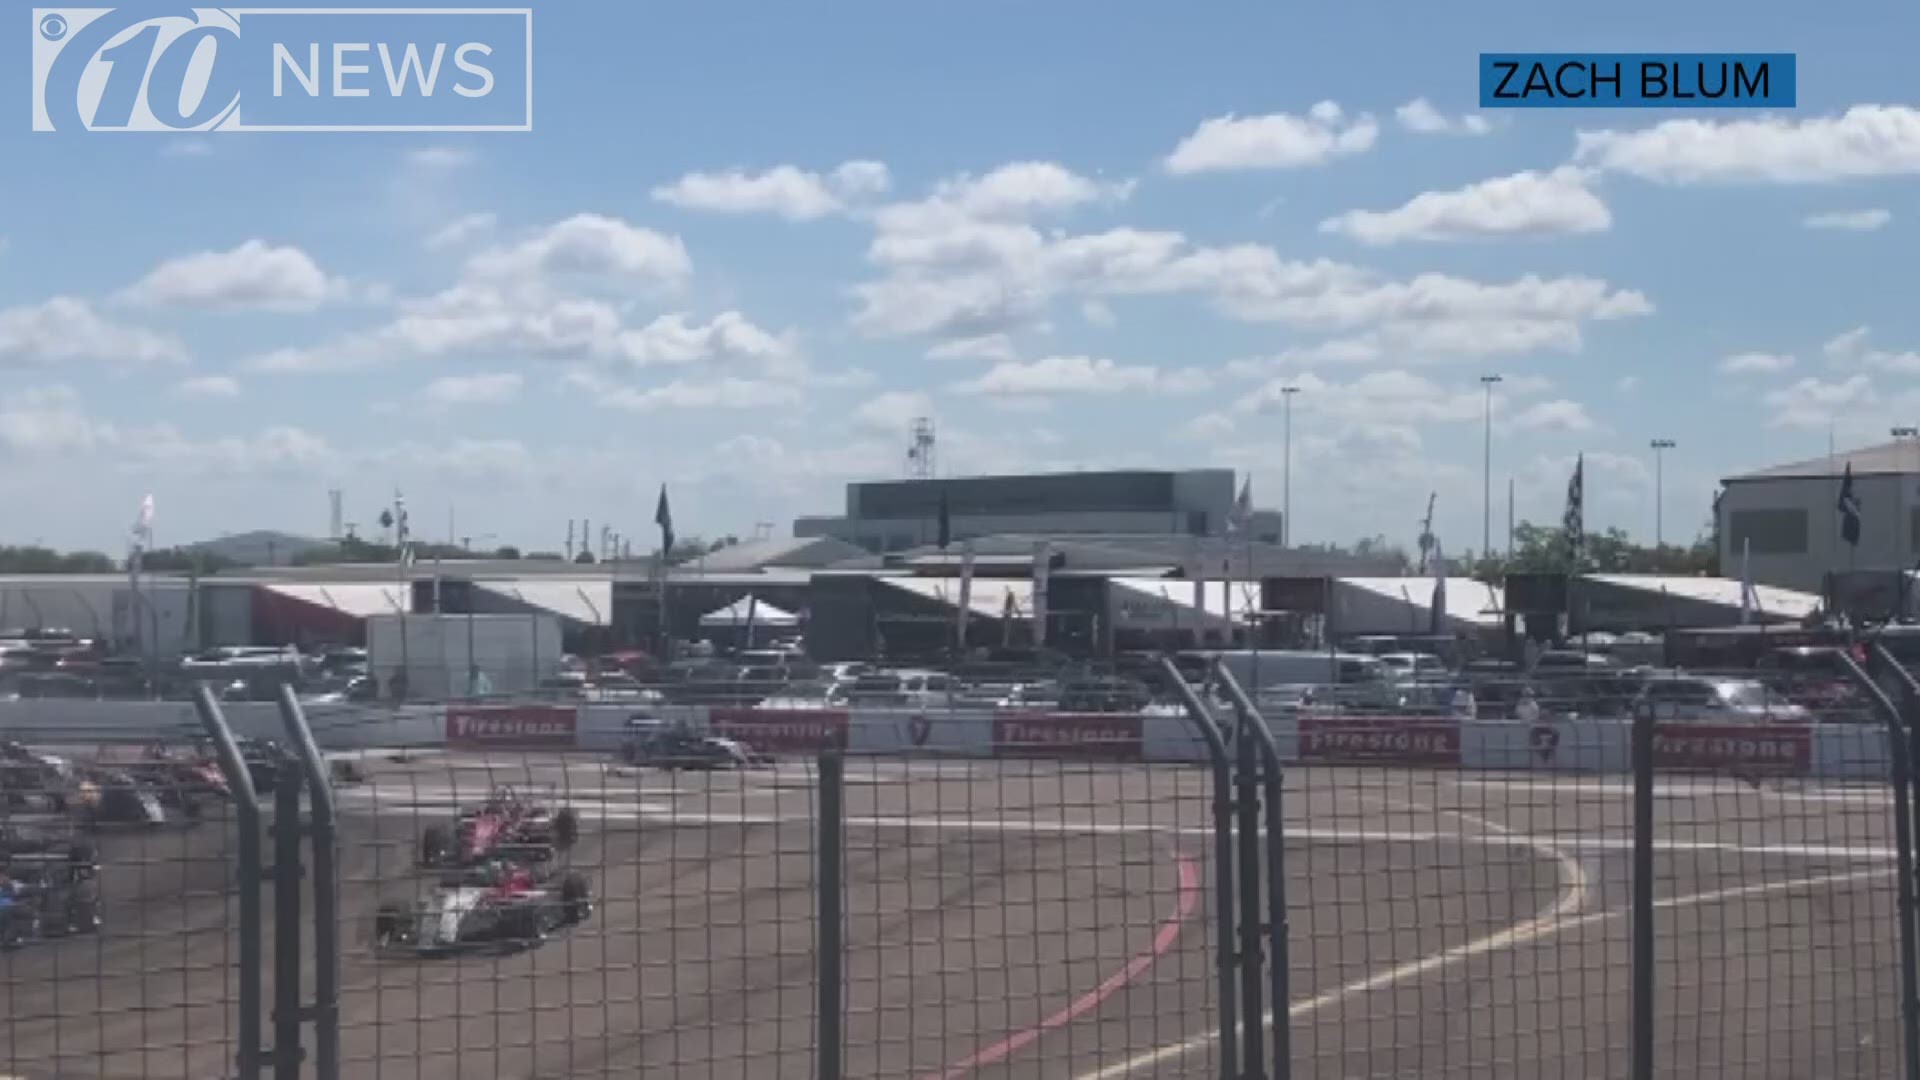 A wreck on the first day of the Grand Prix of St. Petersburg could raise questions about fan safety, despite repeated assurances from race officials that the course is safe for race watchers.